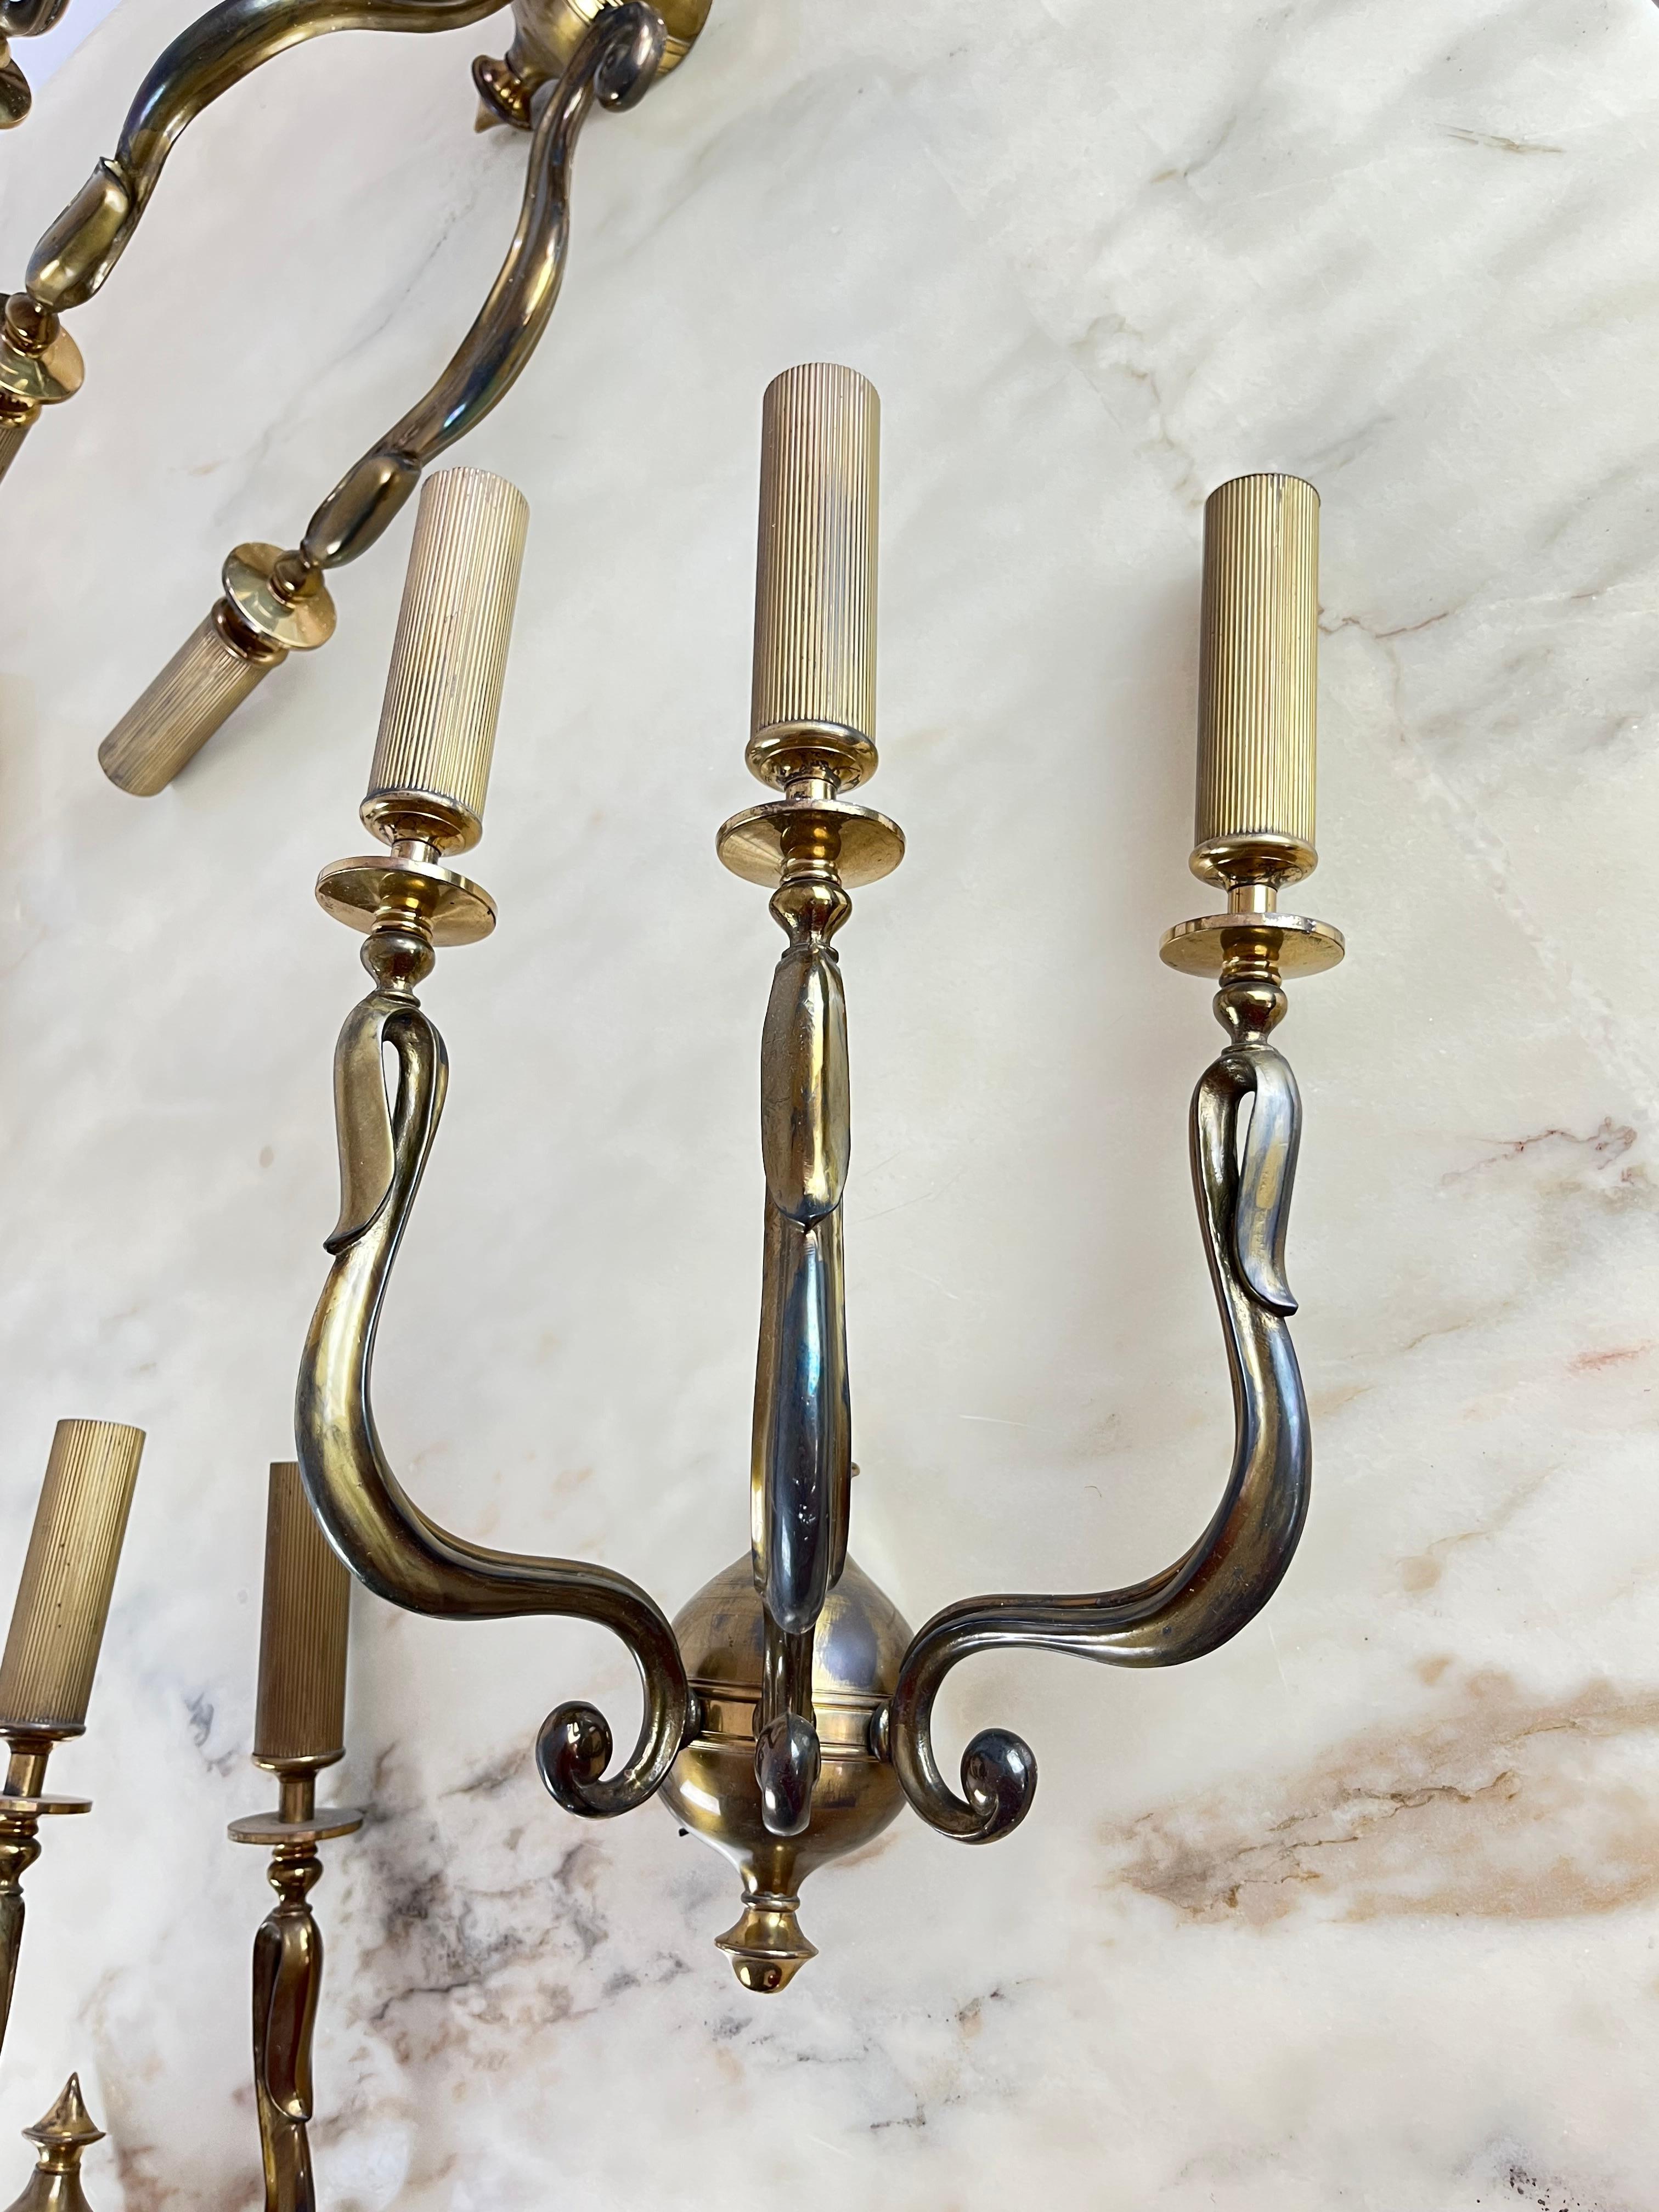 Four large brass sconces, Italy, 1950s
I also have the chandelier for sale among my items.
Found in a noble apartment. Intact and functioning. Small signs of the time.